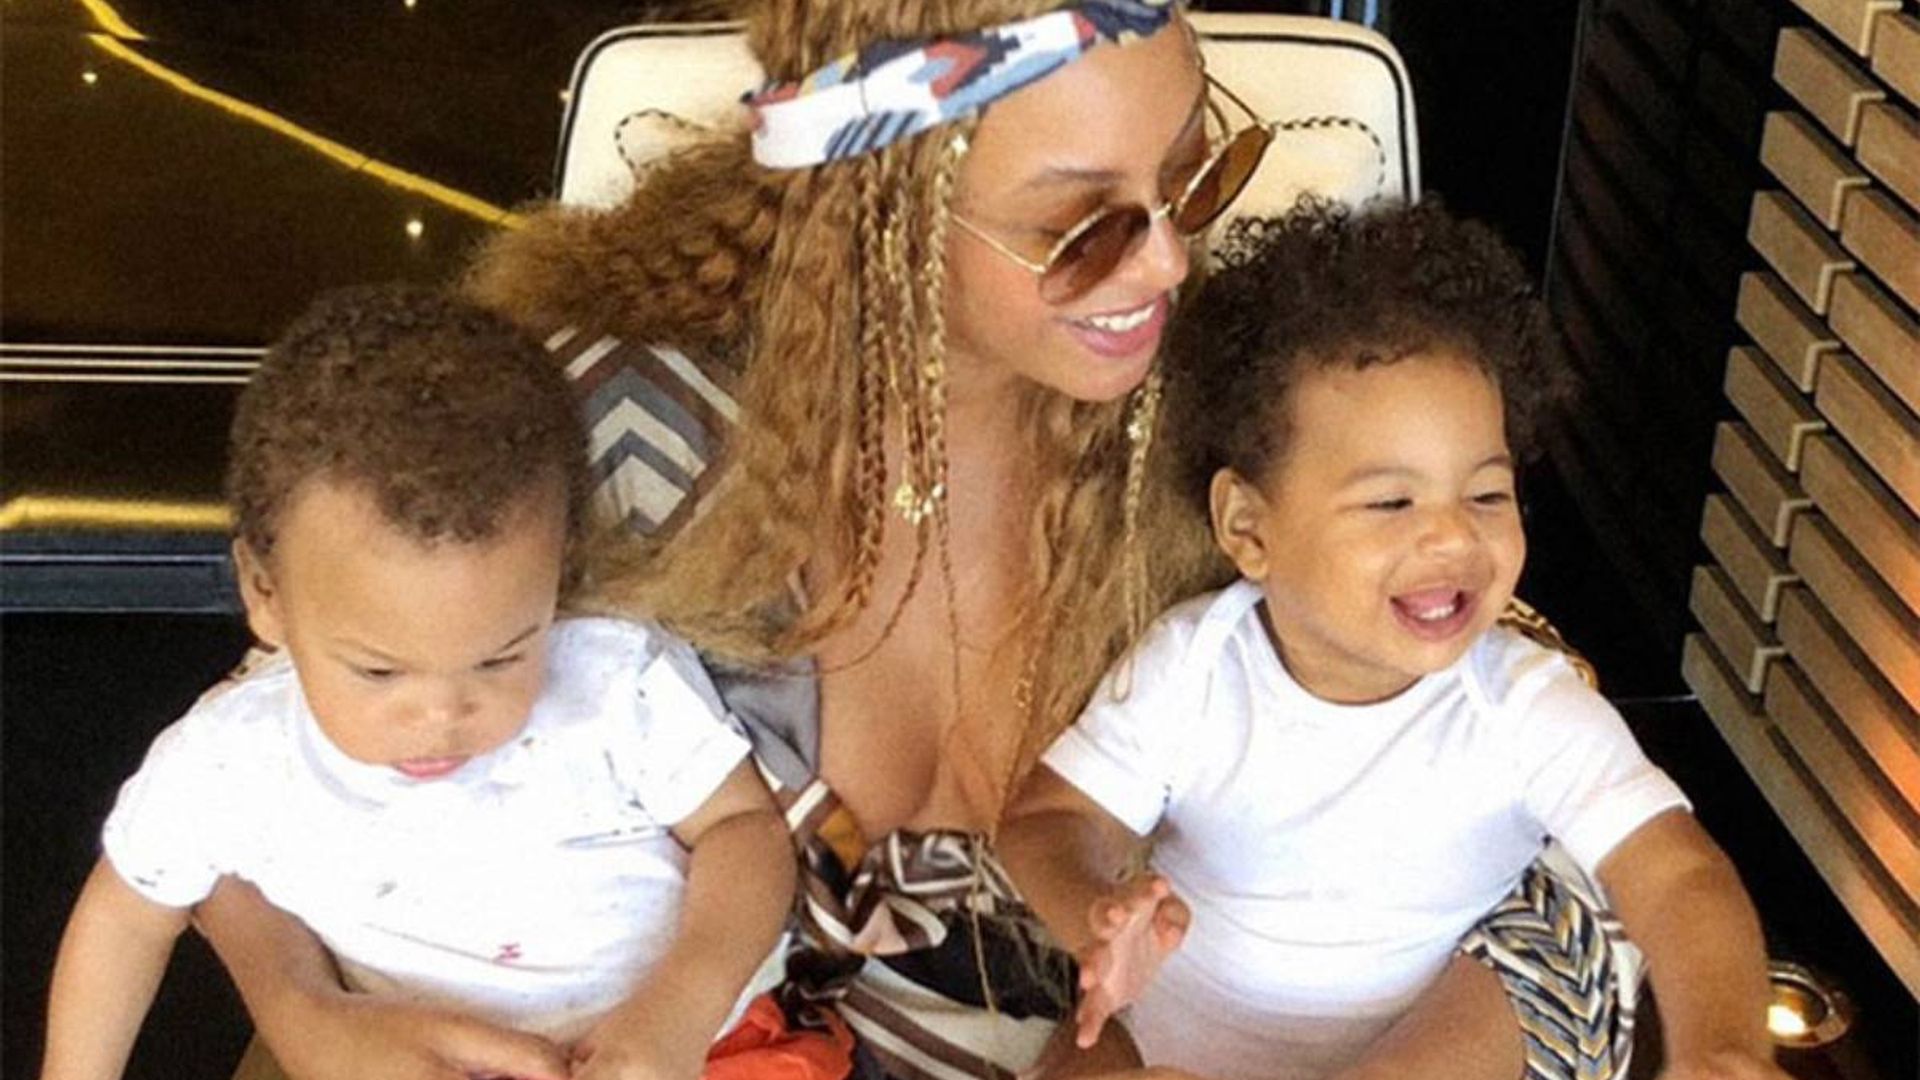 Beyoncé's daughter Rumi makes rare appearance in family vacation photo – and she steals the show!